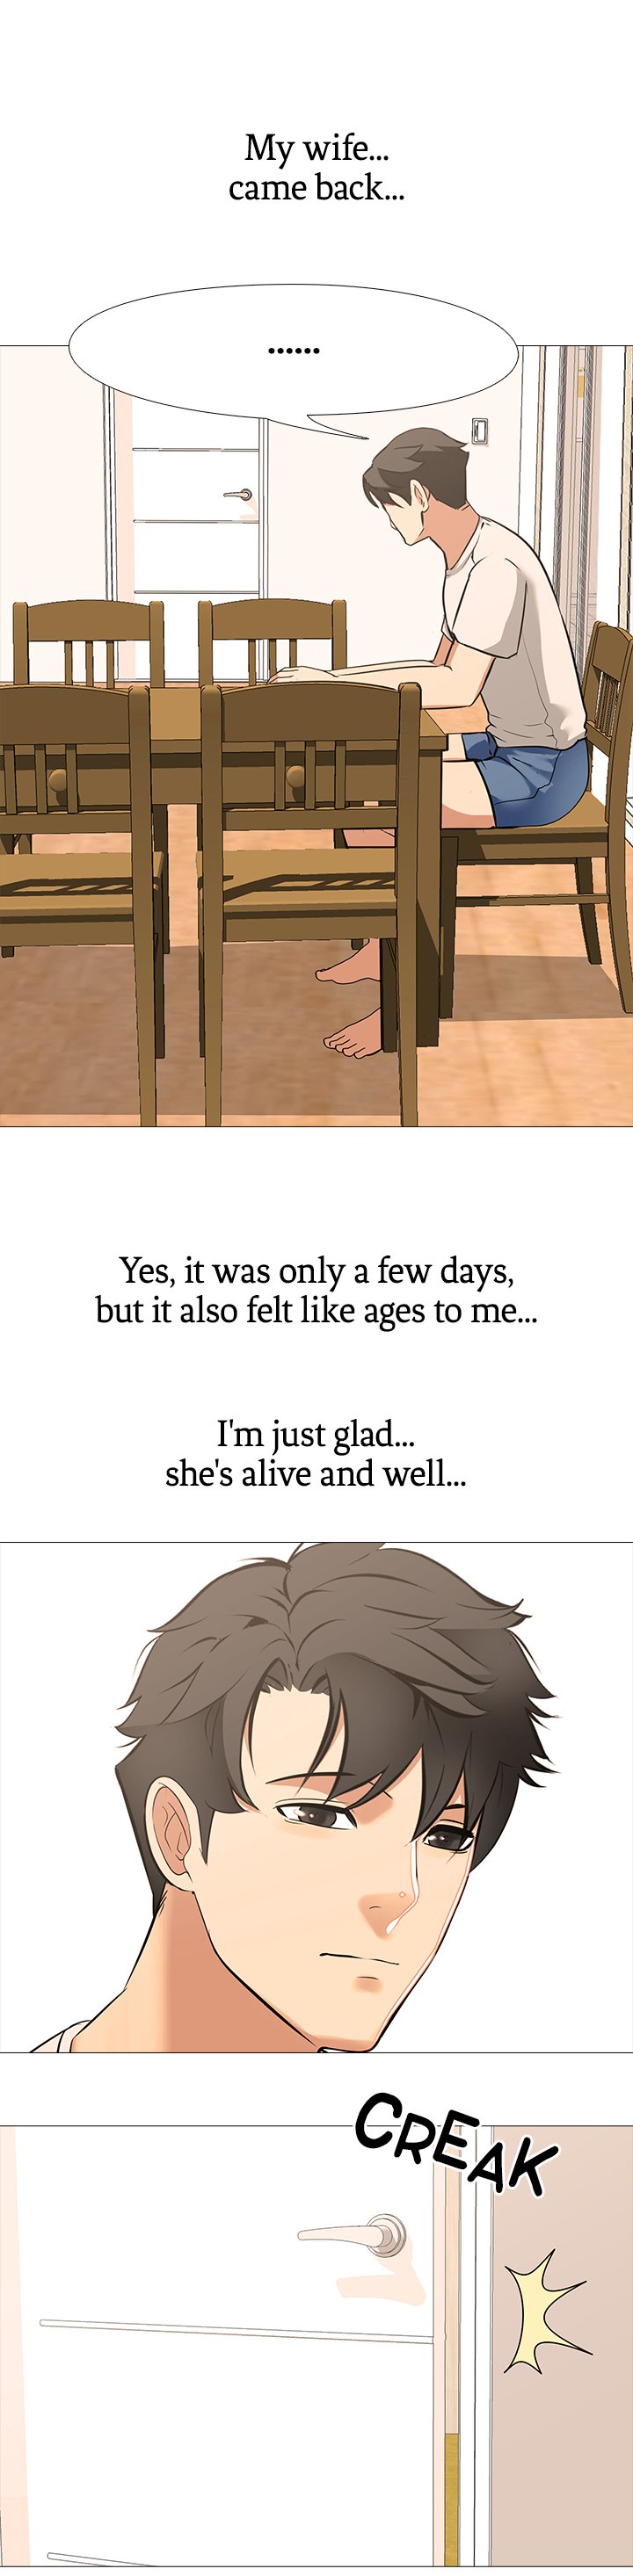 WIFE GAME Chapter 19 - Page 3